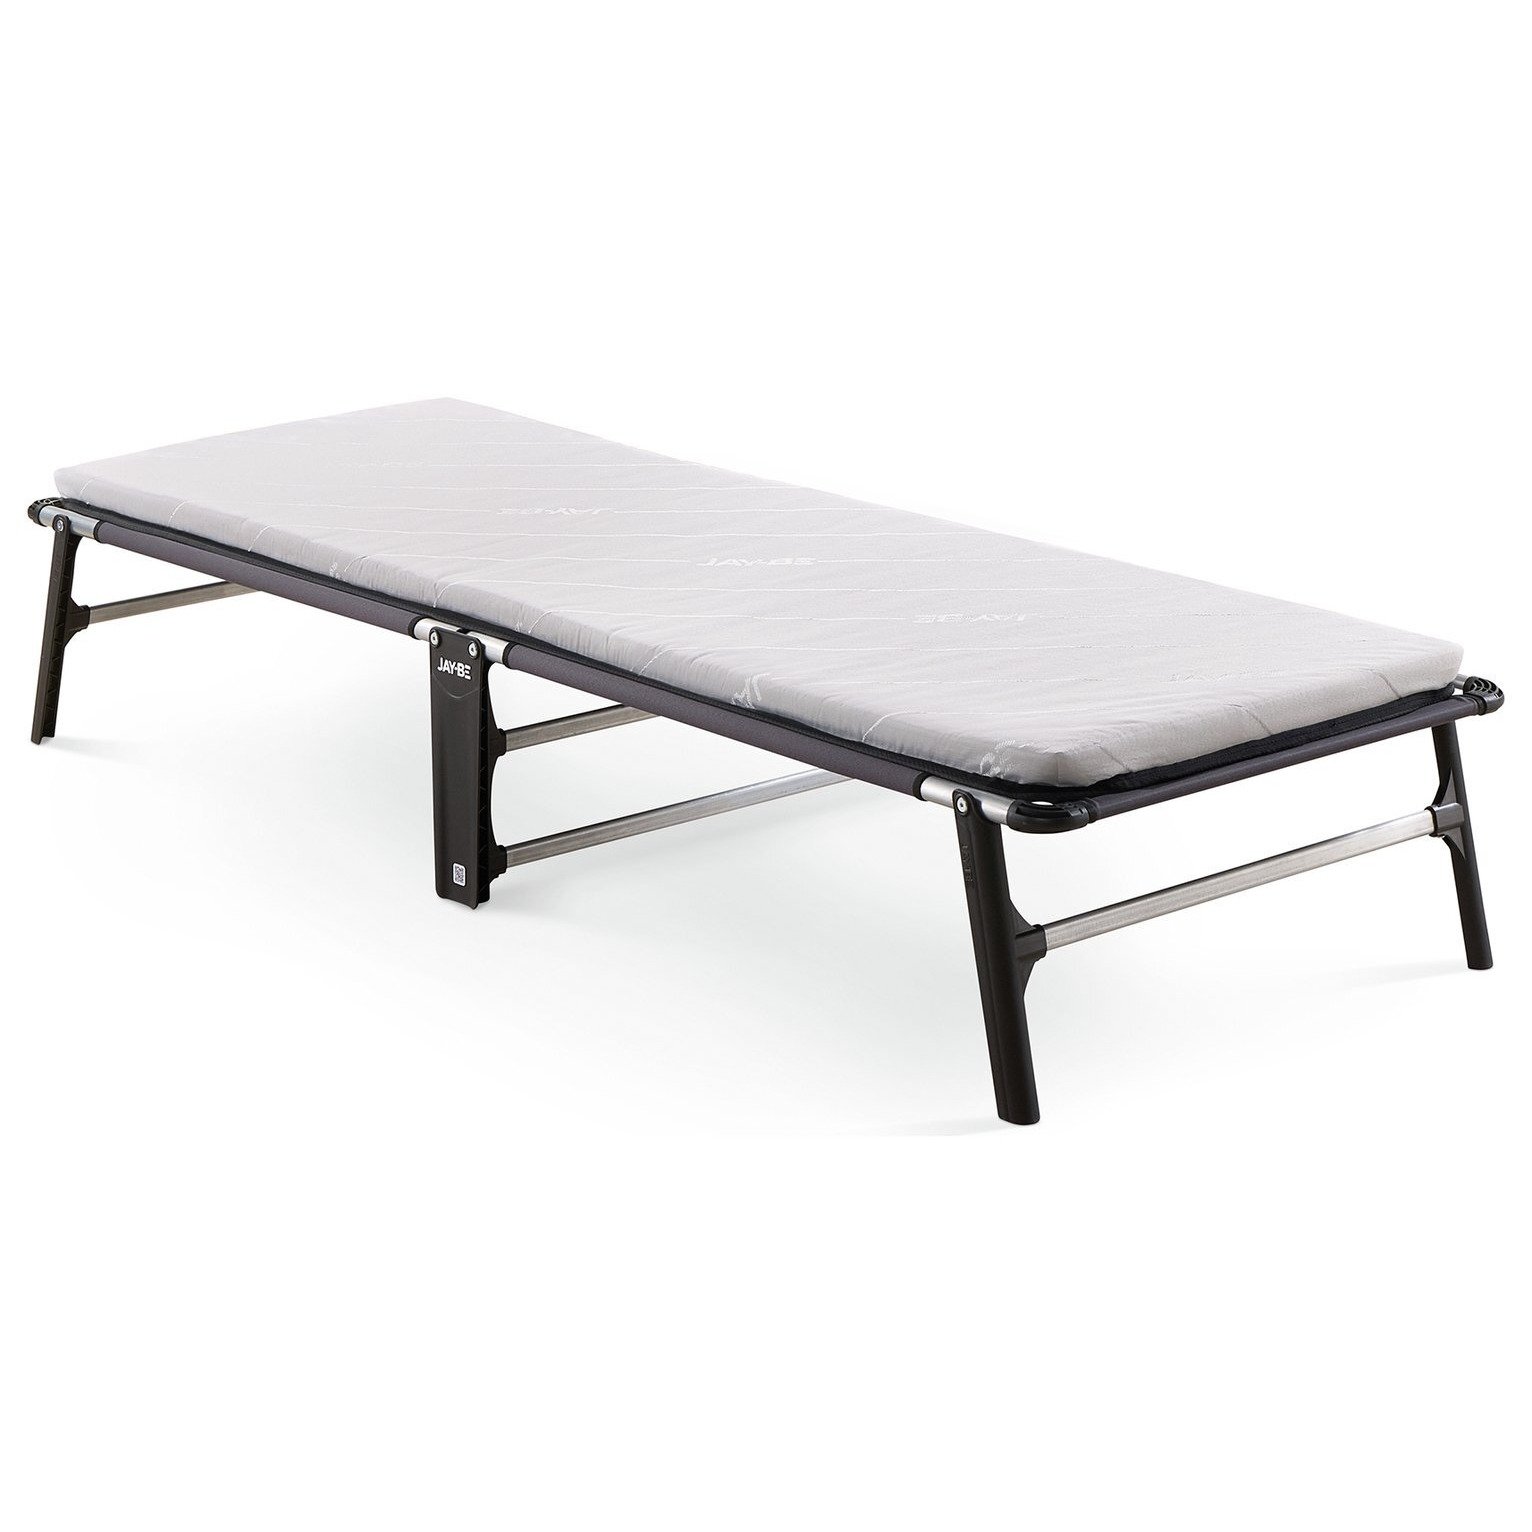 Jay-Be Compact Folding Bed with Mattress - Single - image 1